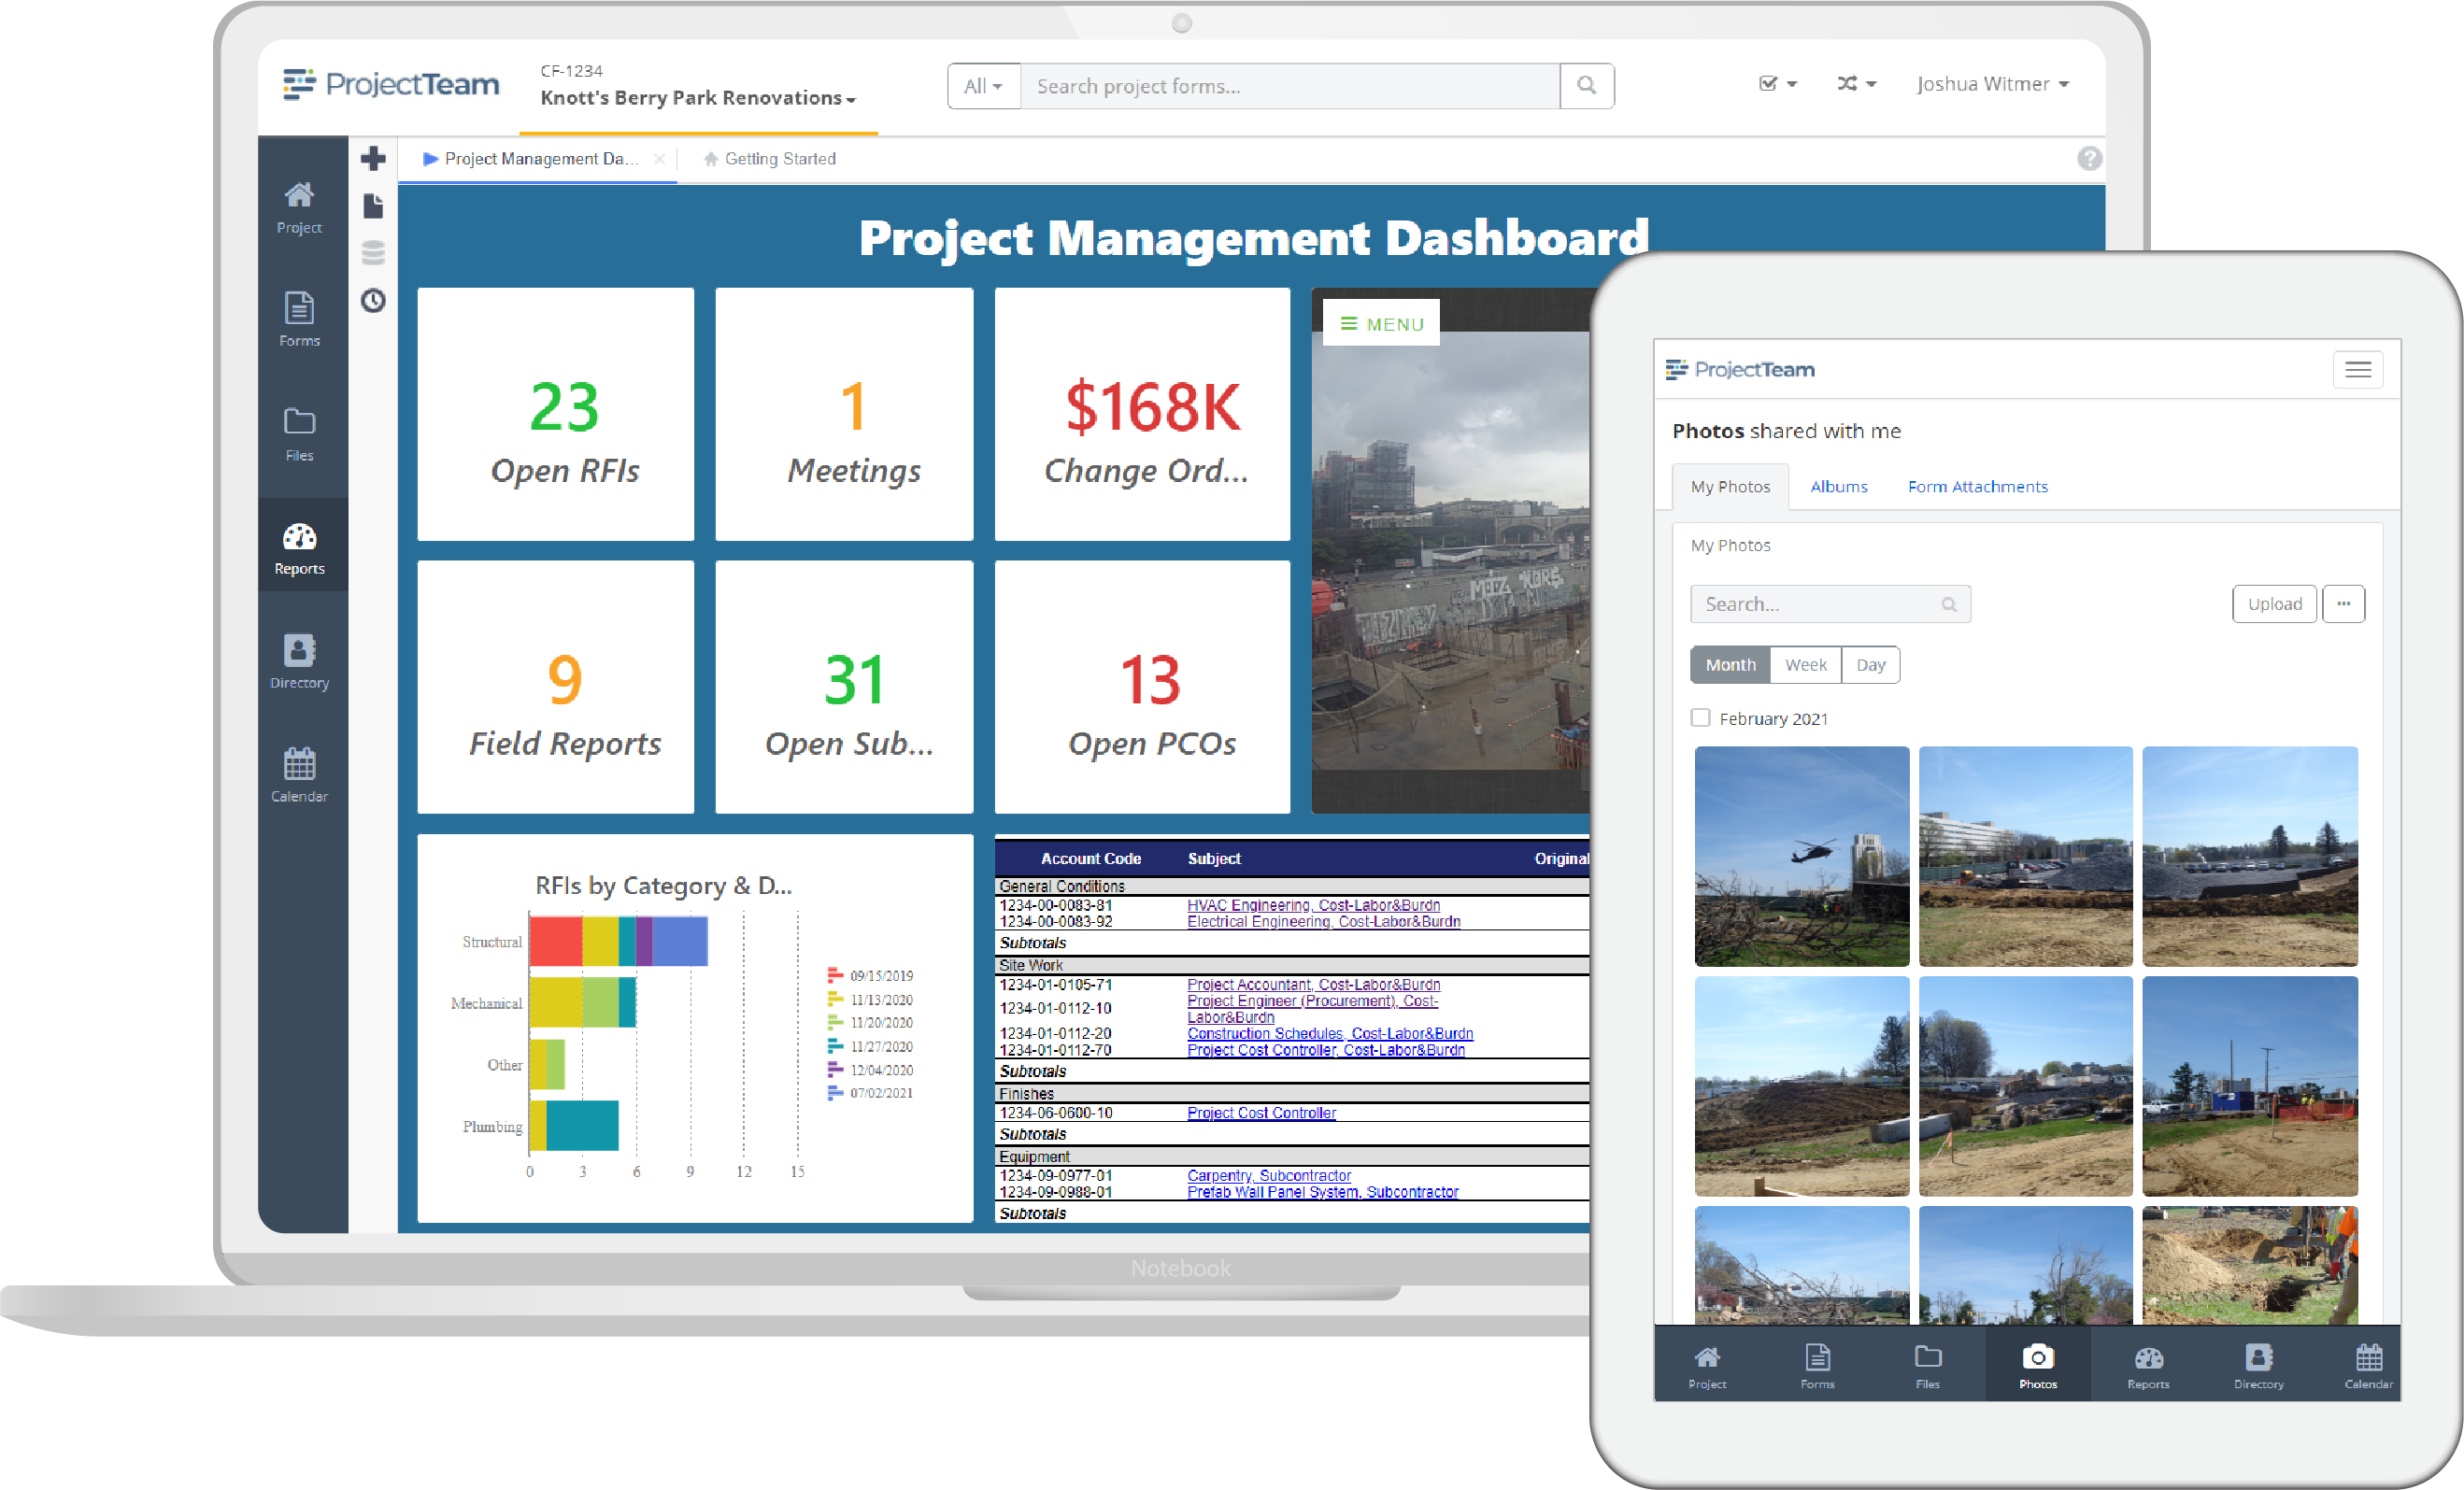 ProjectTeam.com has built-in reporting and dashboarding tools to help you understand your project's health at any time. Export reports to PDF, Excel, or CSV. Drag and drop tools make it easy to create pixel-perfect reports.